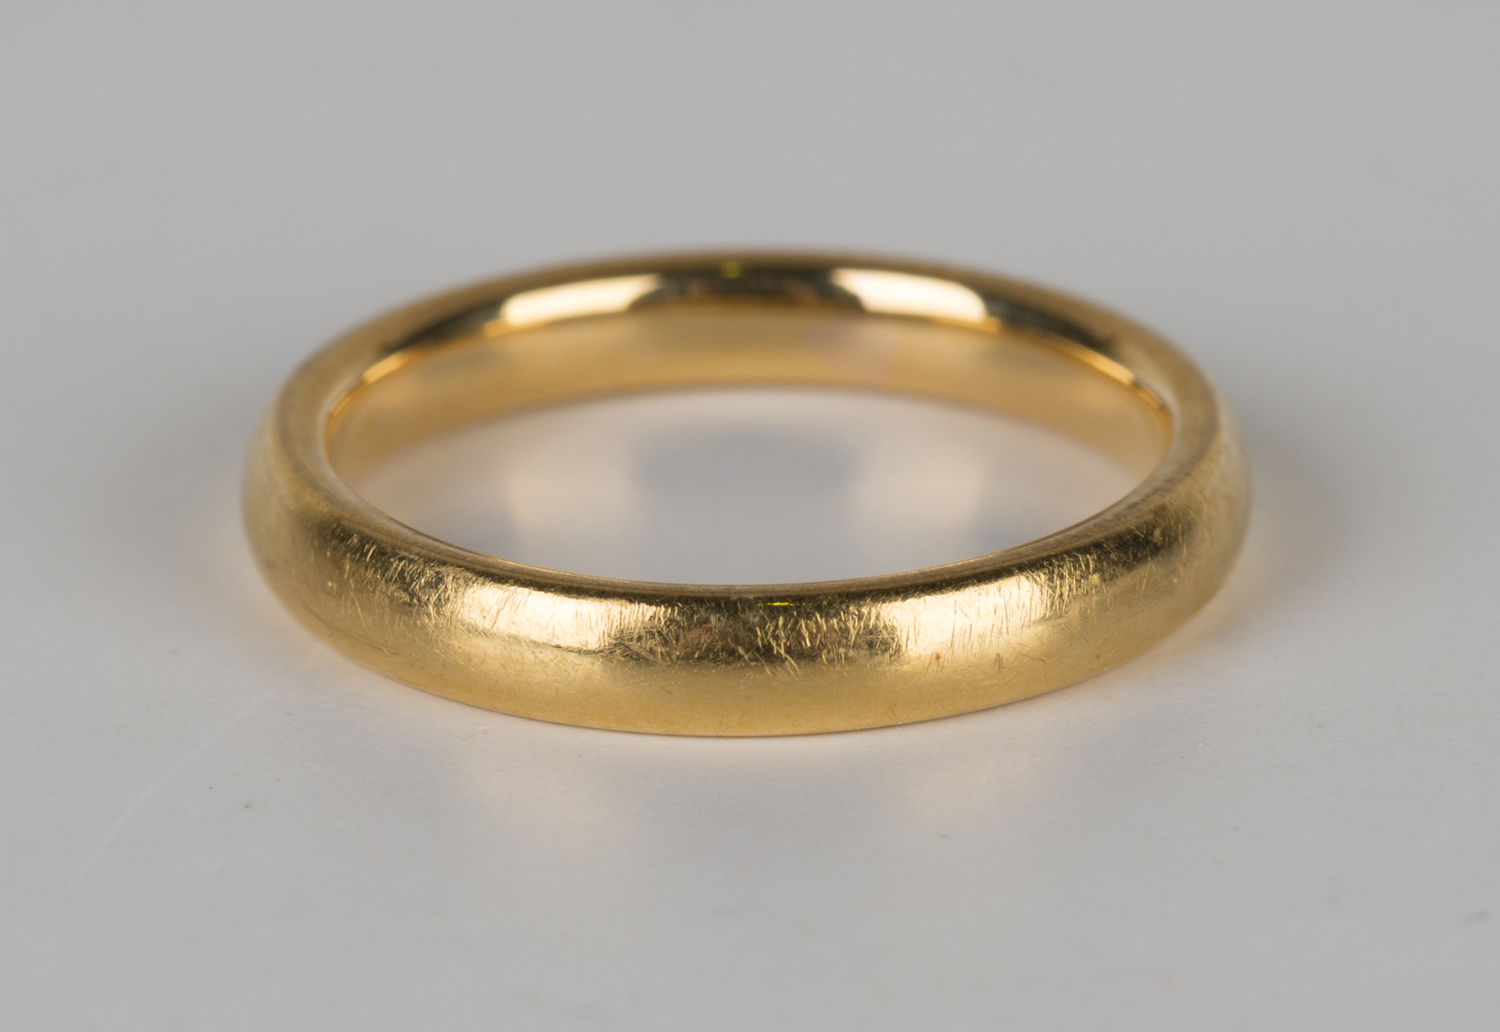 A 22ct gold plain wedding ring, London 1934, ring size approx L.Buyer’s Premium 29.4% (including VAT